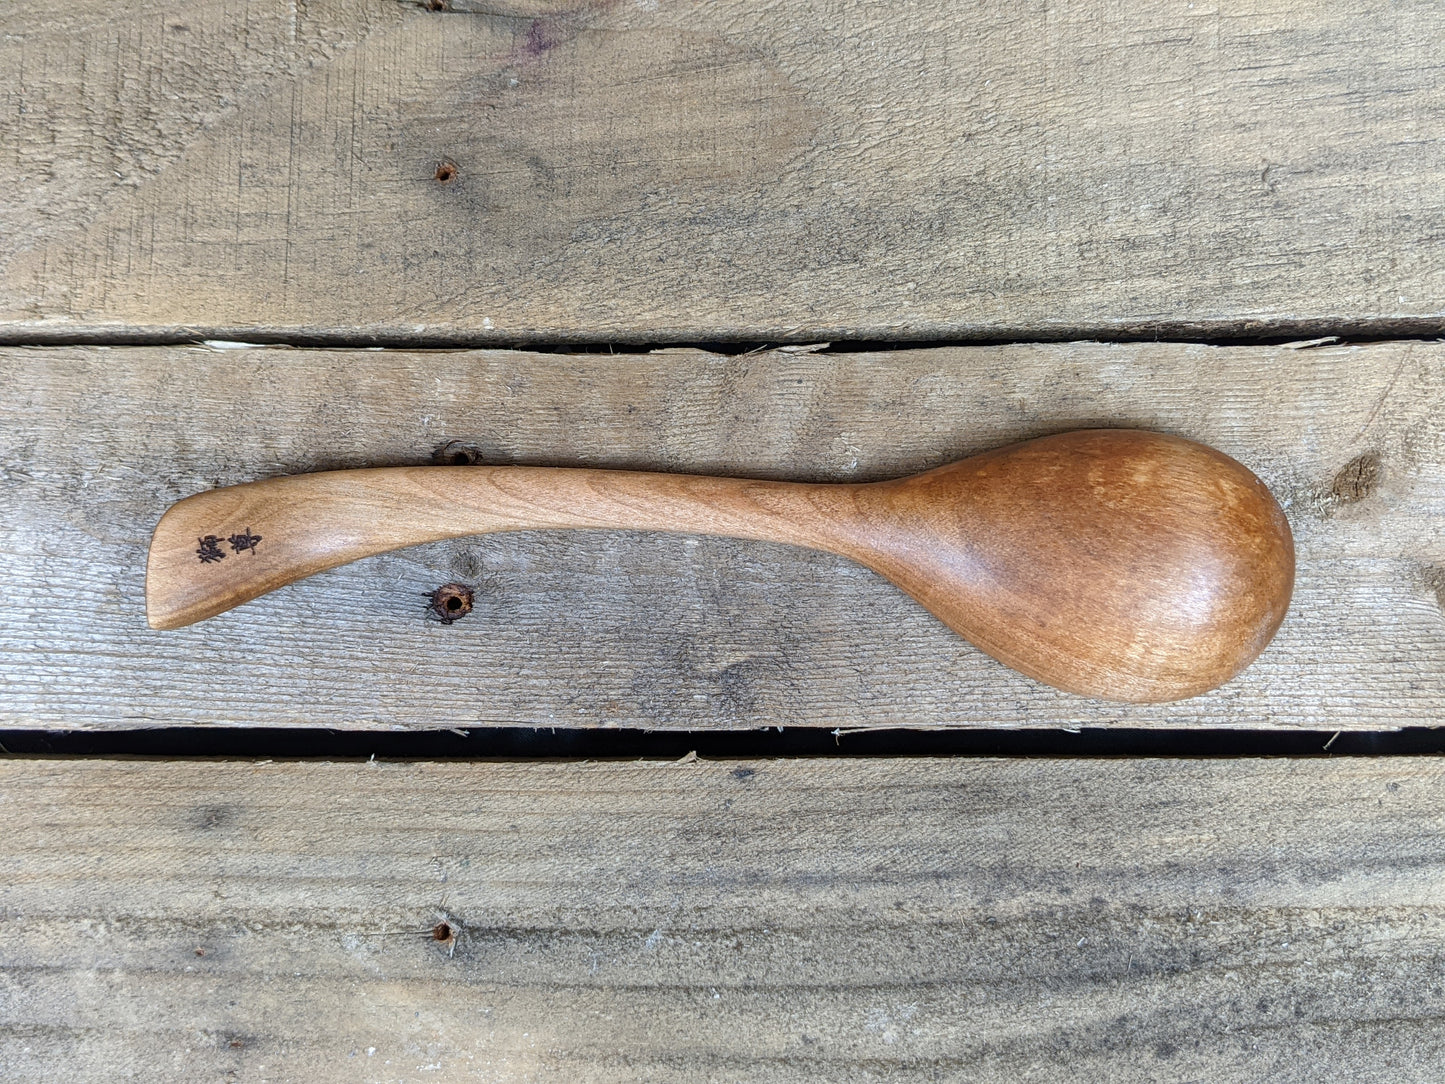 Silver maple everyday spoon